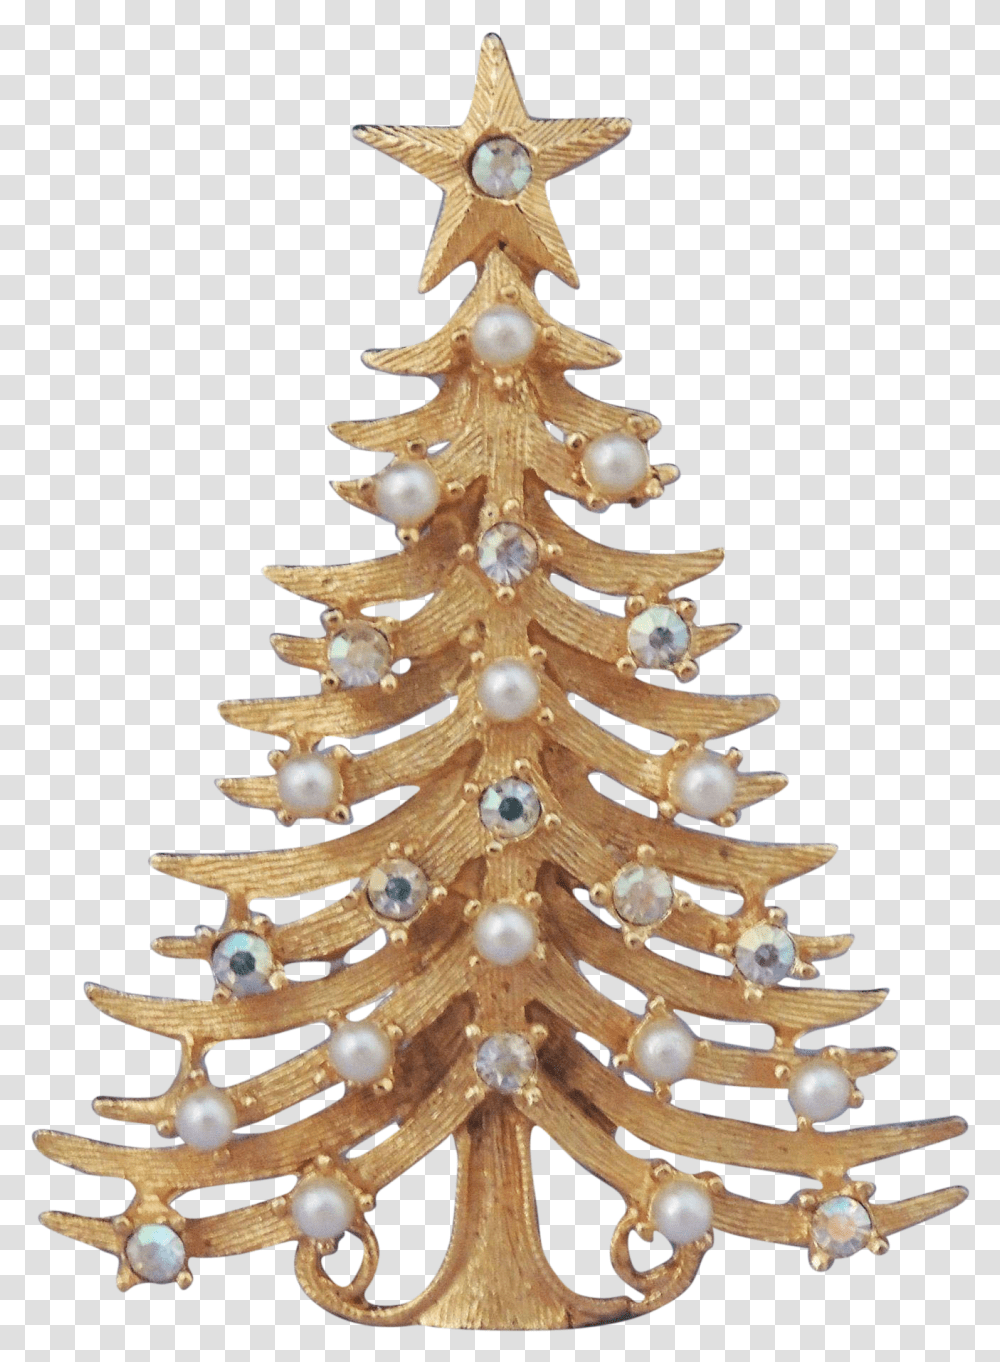 Download Hd Vintage Christmas Christmas Ornament, Tree, Plant, Christmas Tree, Accessories Transparent Png